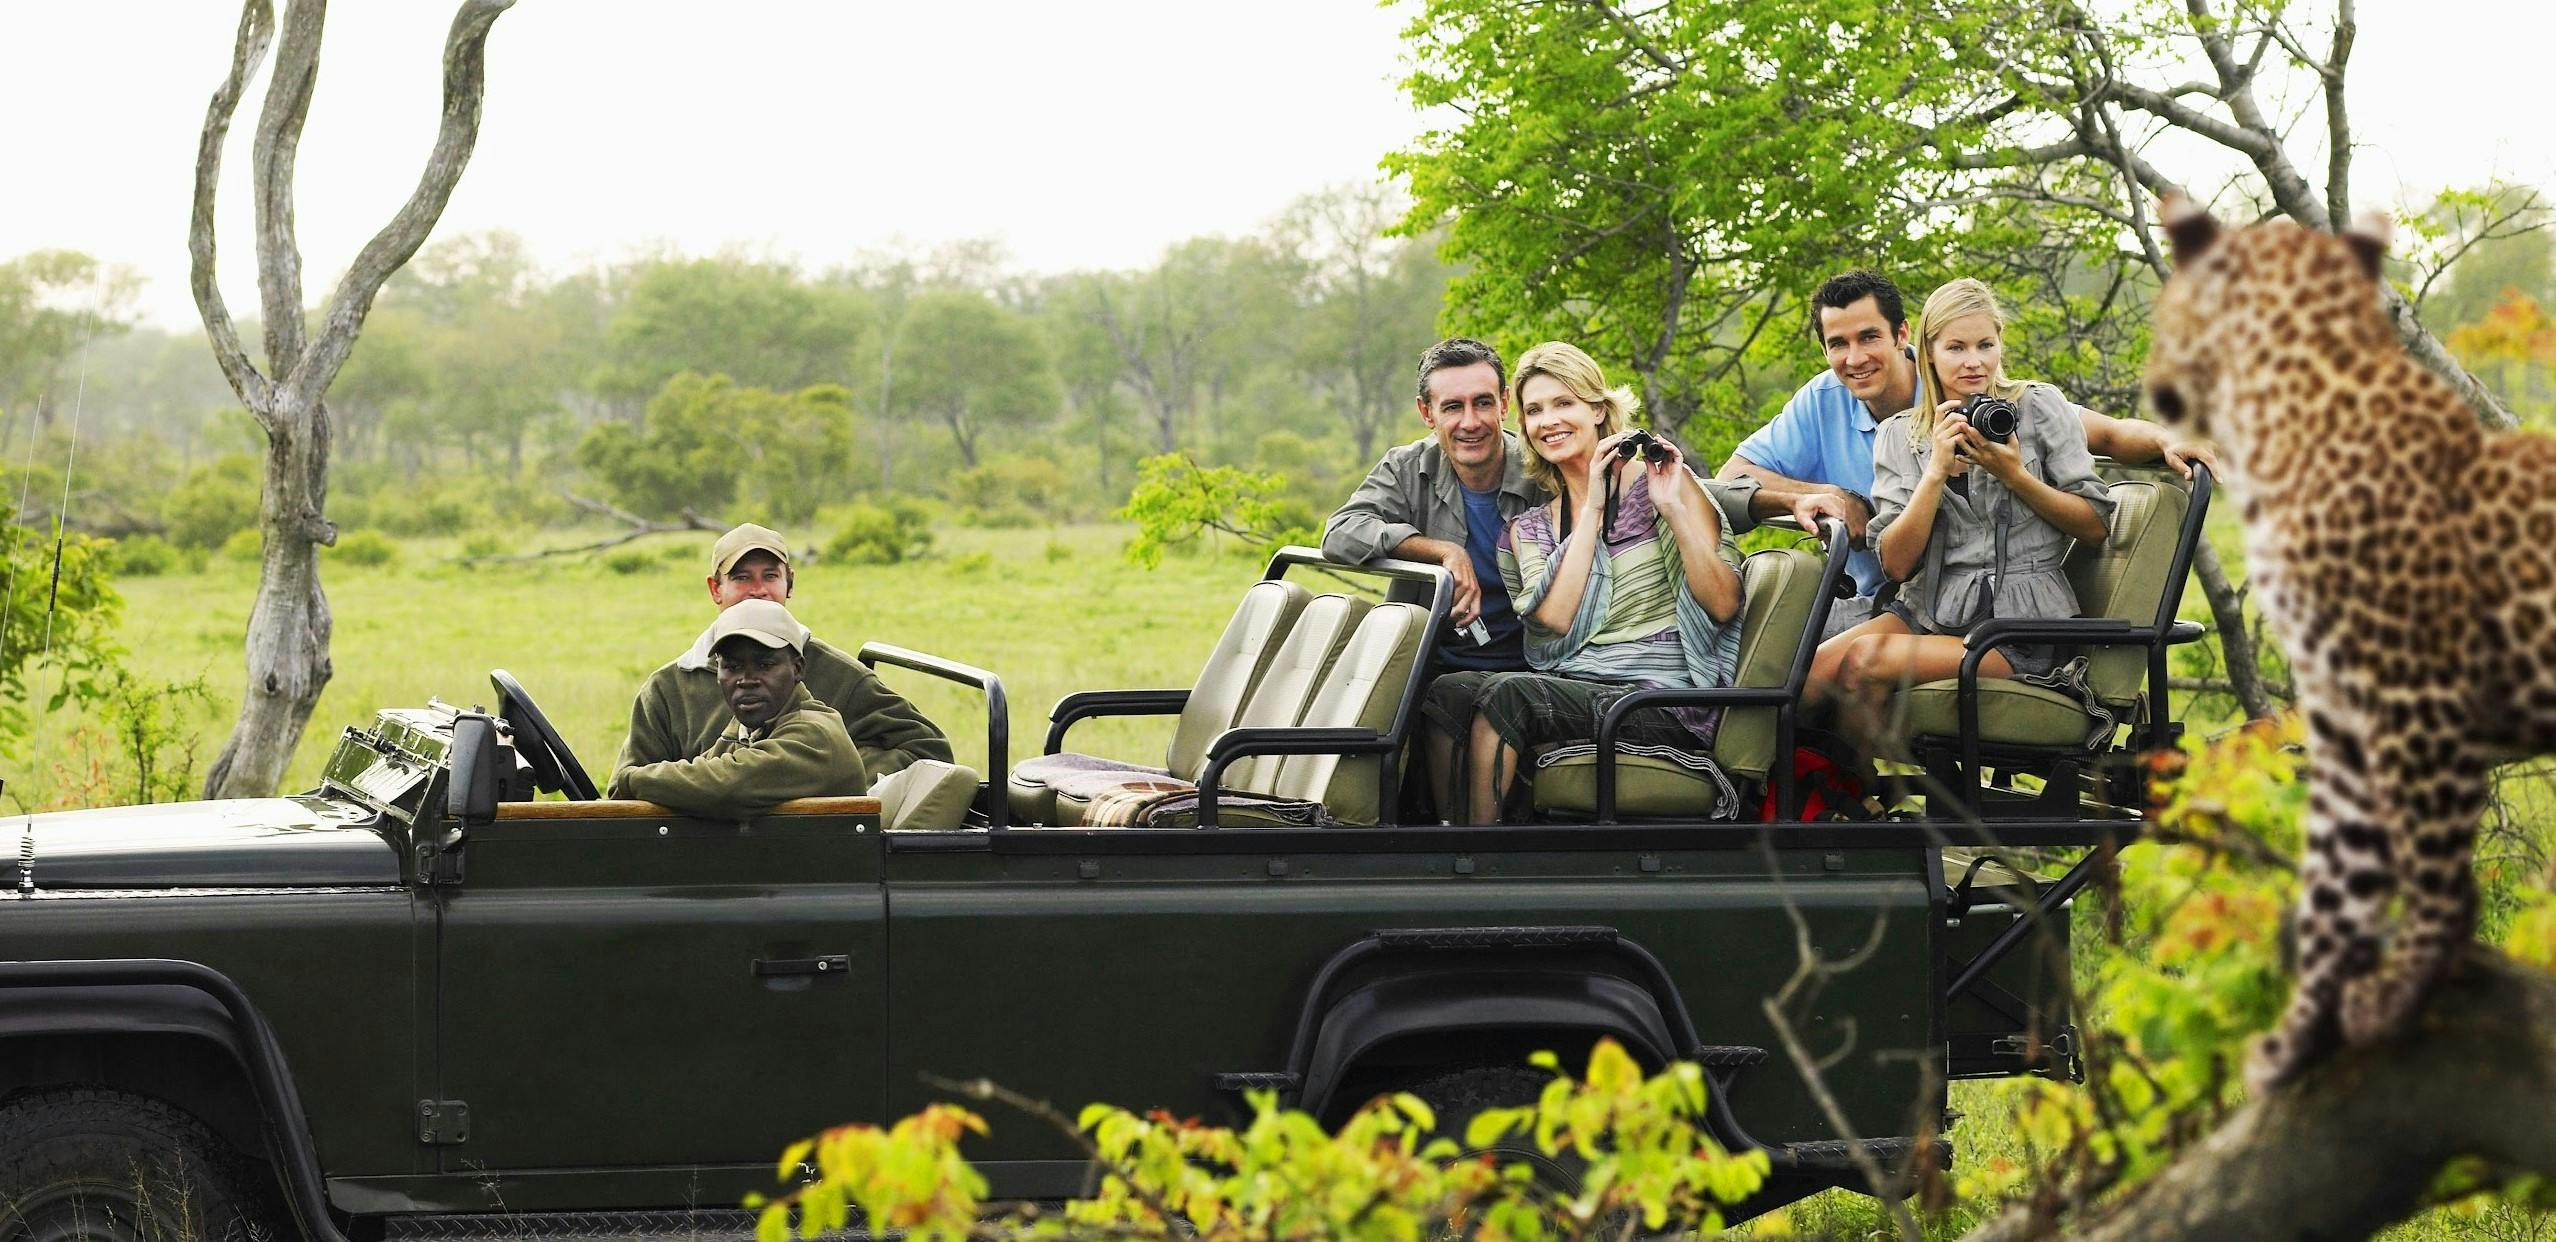 A group of people sitting in the back of a jeep watching a cheetah.